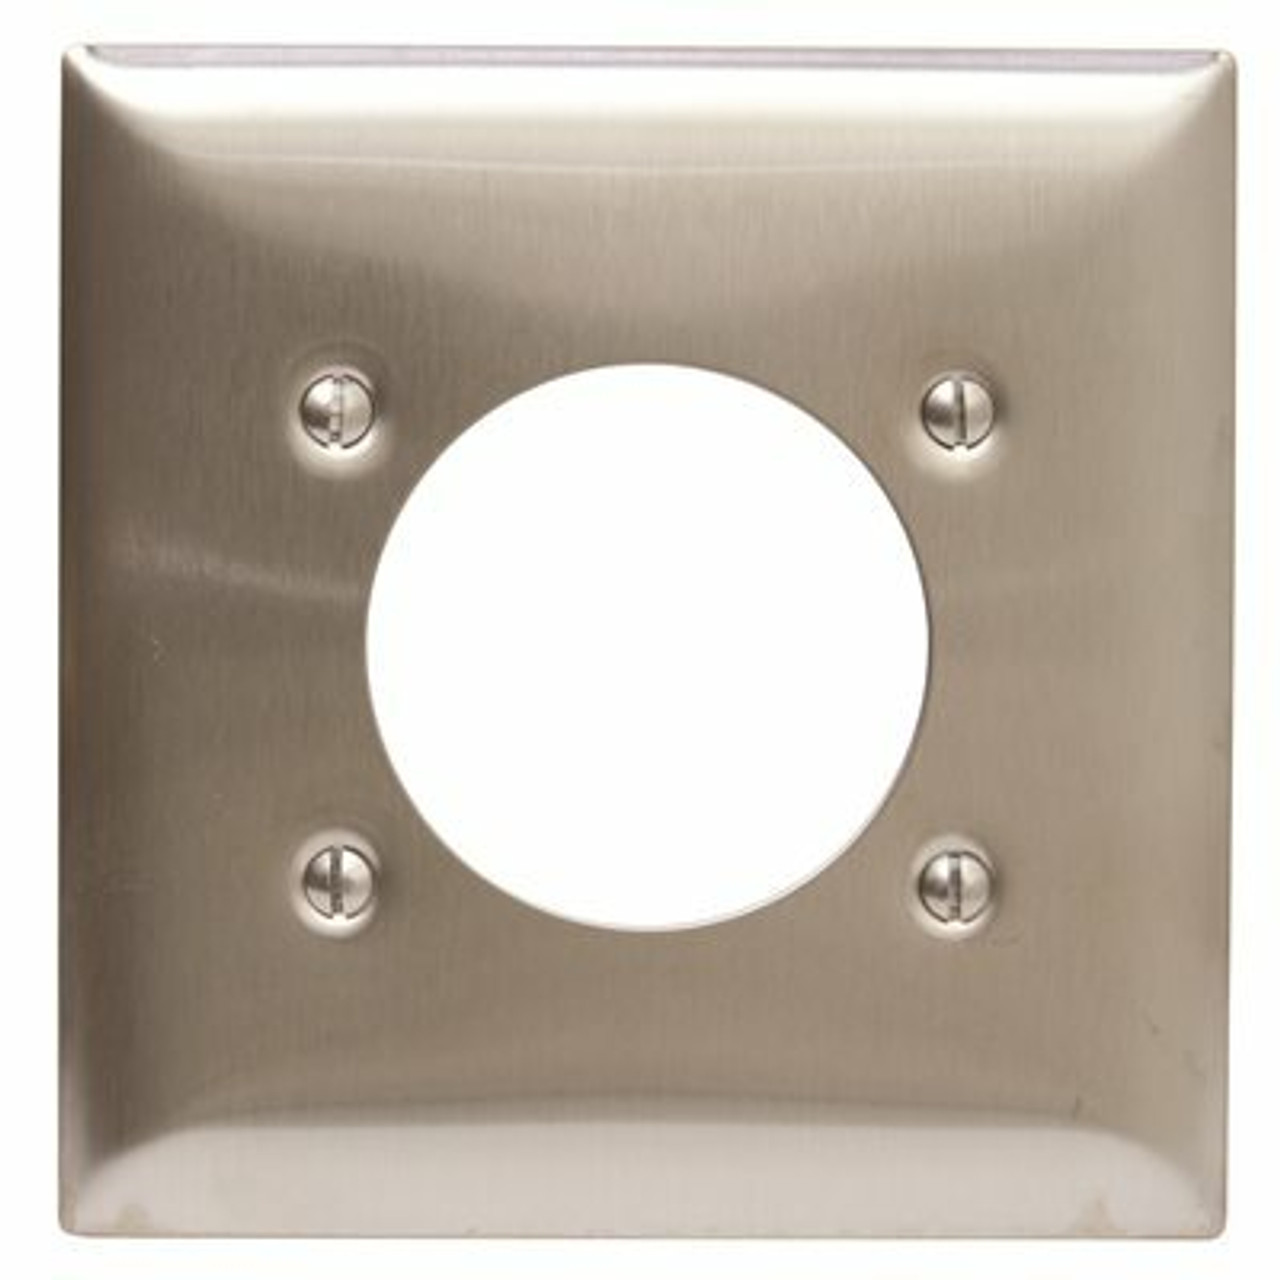 Hubbell Wiring Stainless Steel 2-Gang Single Receptacle Wall Plate (1-Pack)